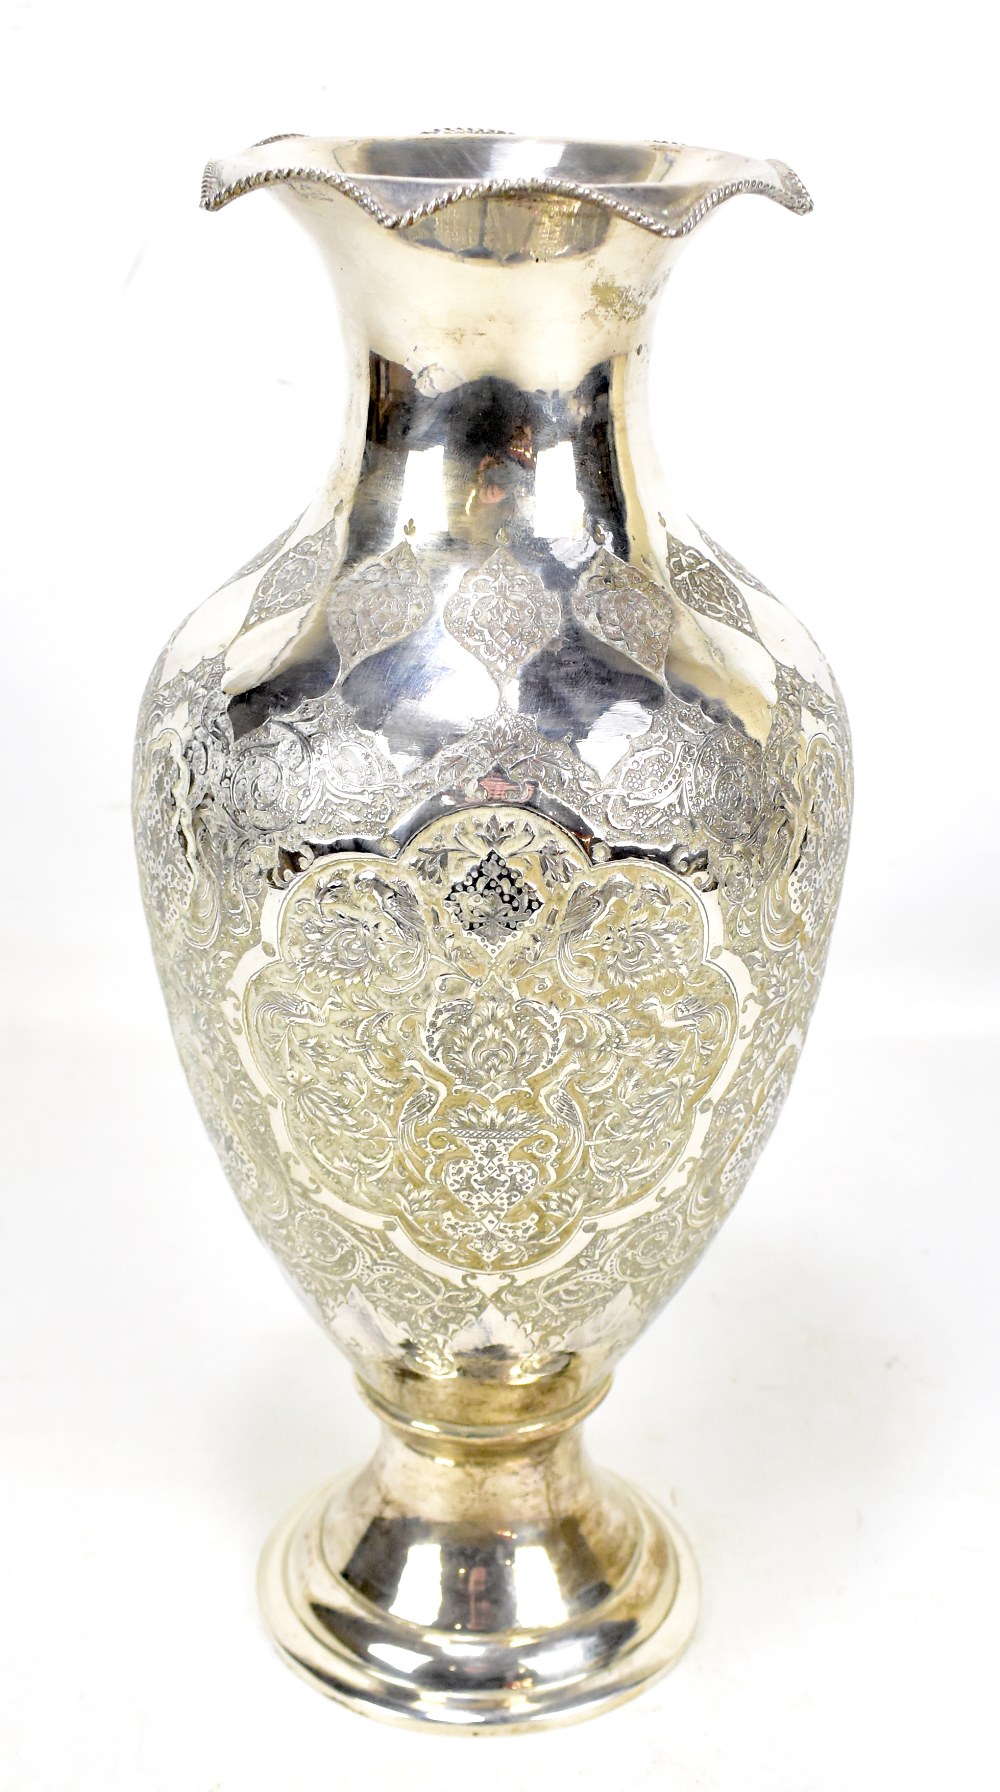 A South East Asian white metal baluster vase featuring repoussé flora and fauna decoration with